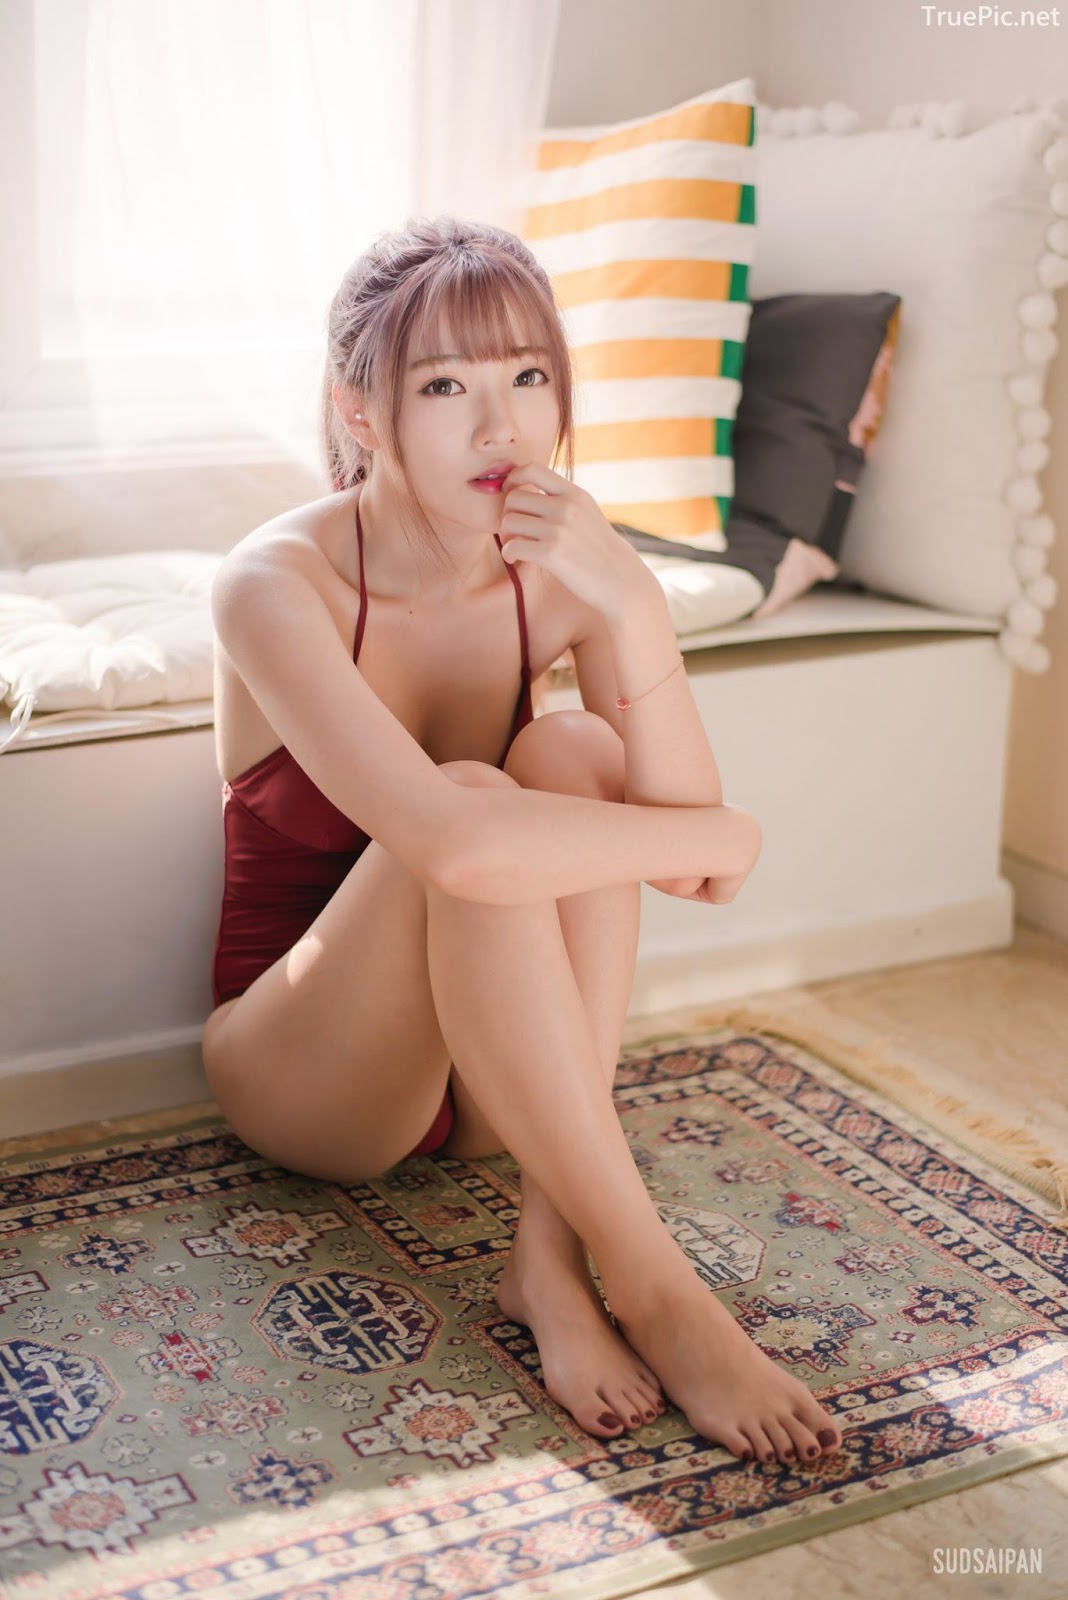 Chinese hot streaming girl - 簡欣汝 - Red Swimming Suit - TruePic.net - Picture 18